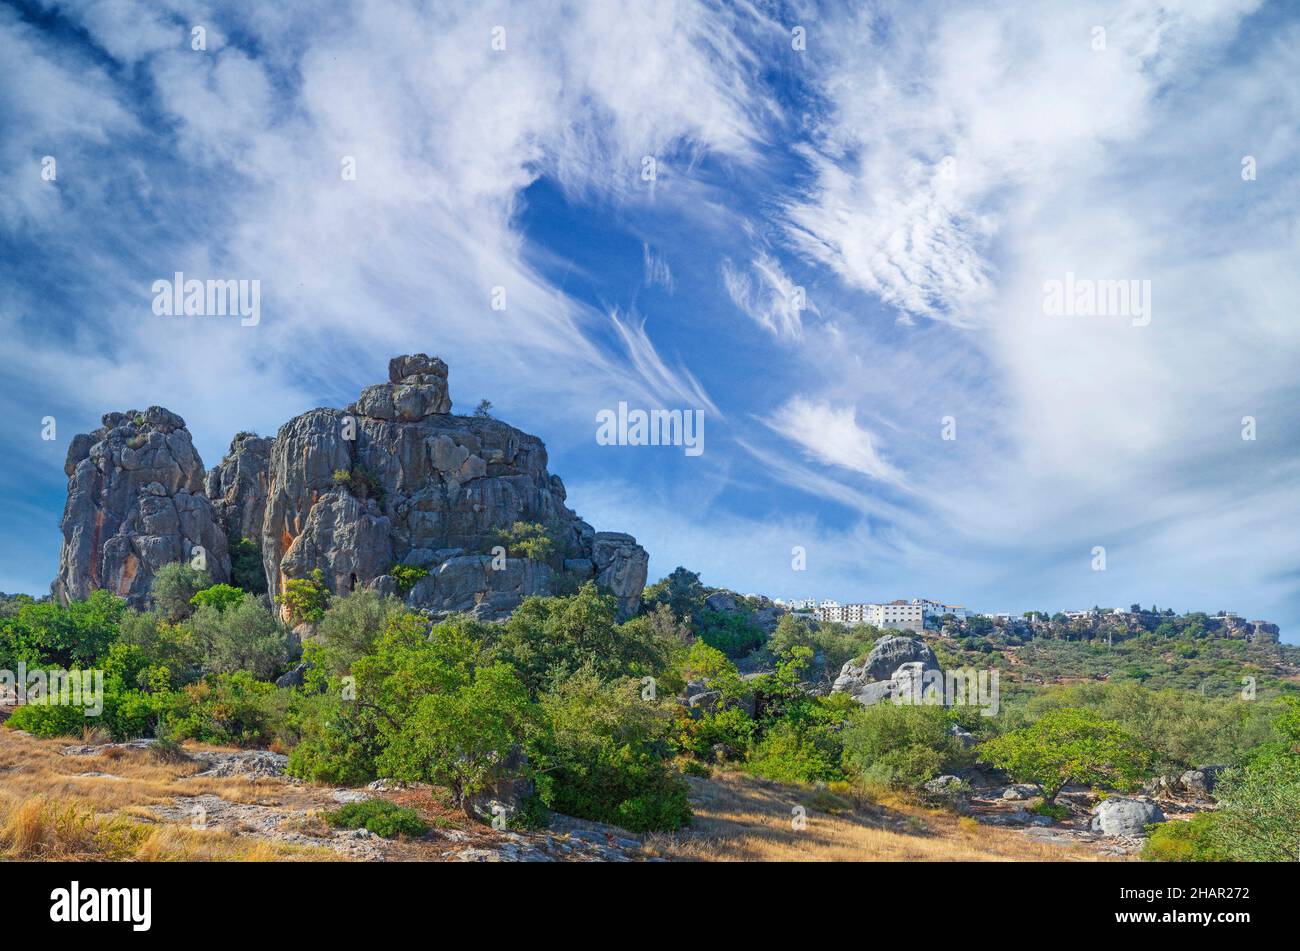 A view of Comares, a town 703 meters above sea level located in the foothills of the Montes de Málaga, Andalucia, Spain. Stock Photo